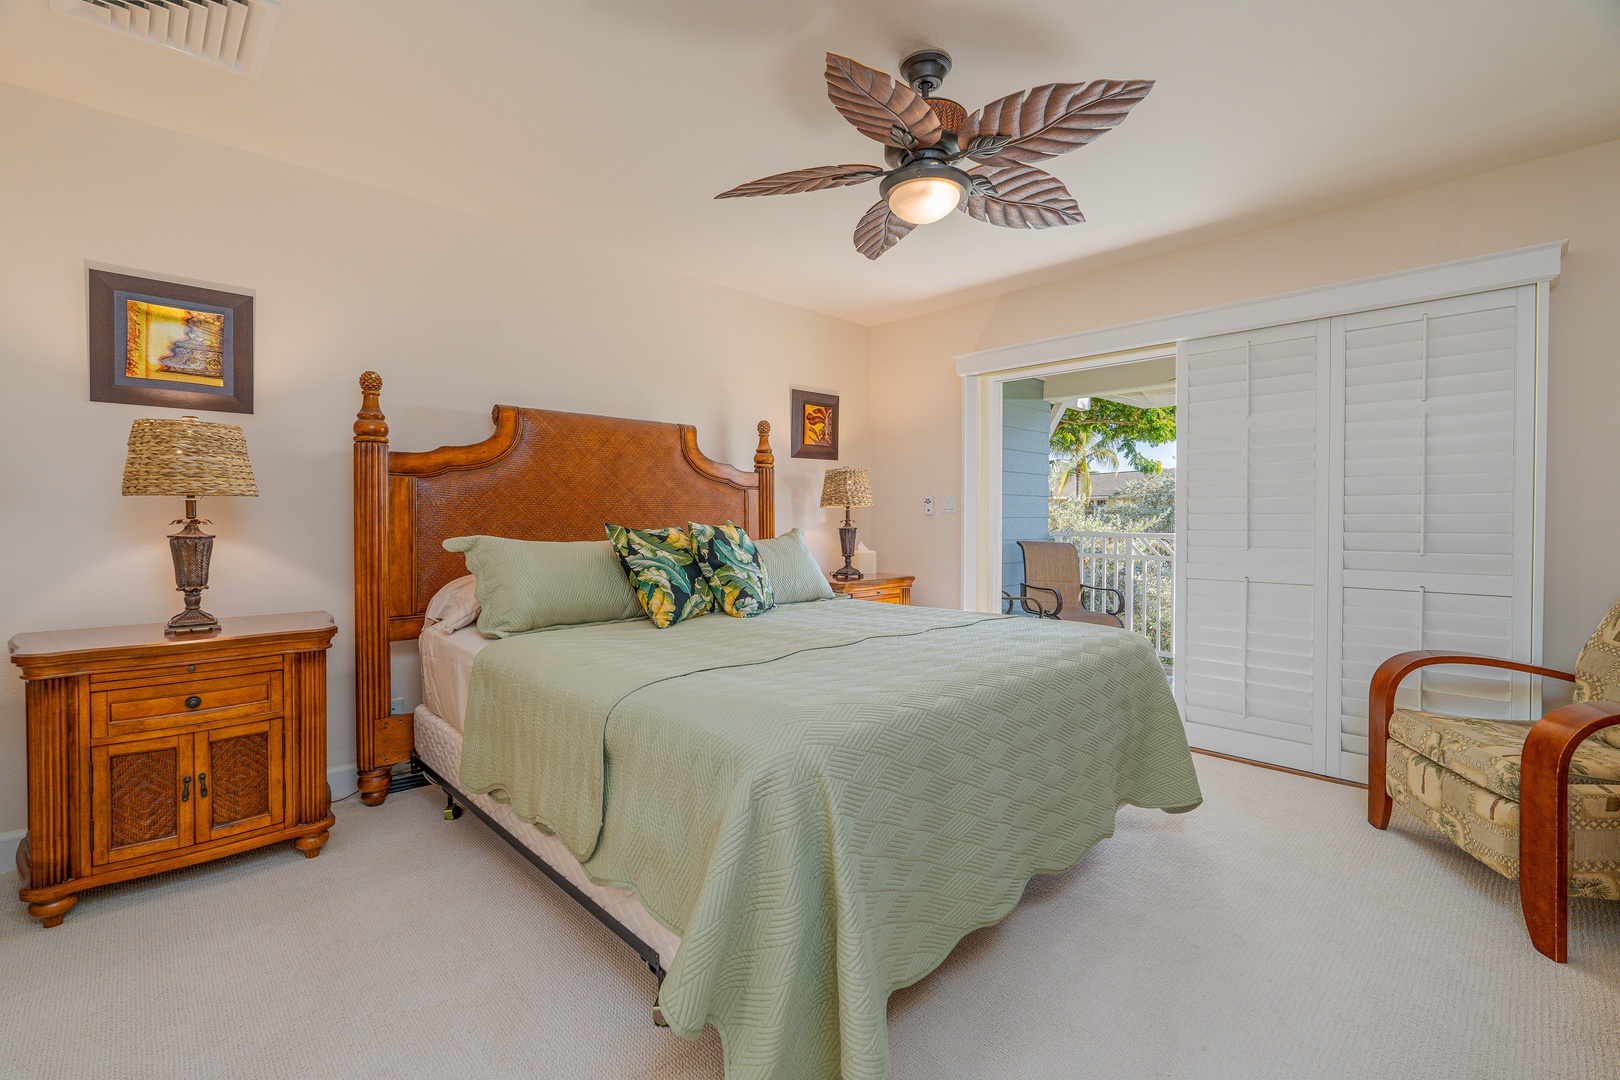 Kapolei Vacation Rentals, Ko Olina Kai 1097C - A comfortable king bed with ceiling fan for your private sanctuary.